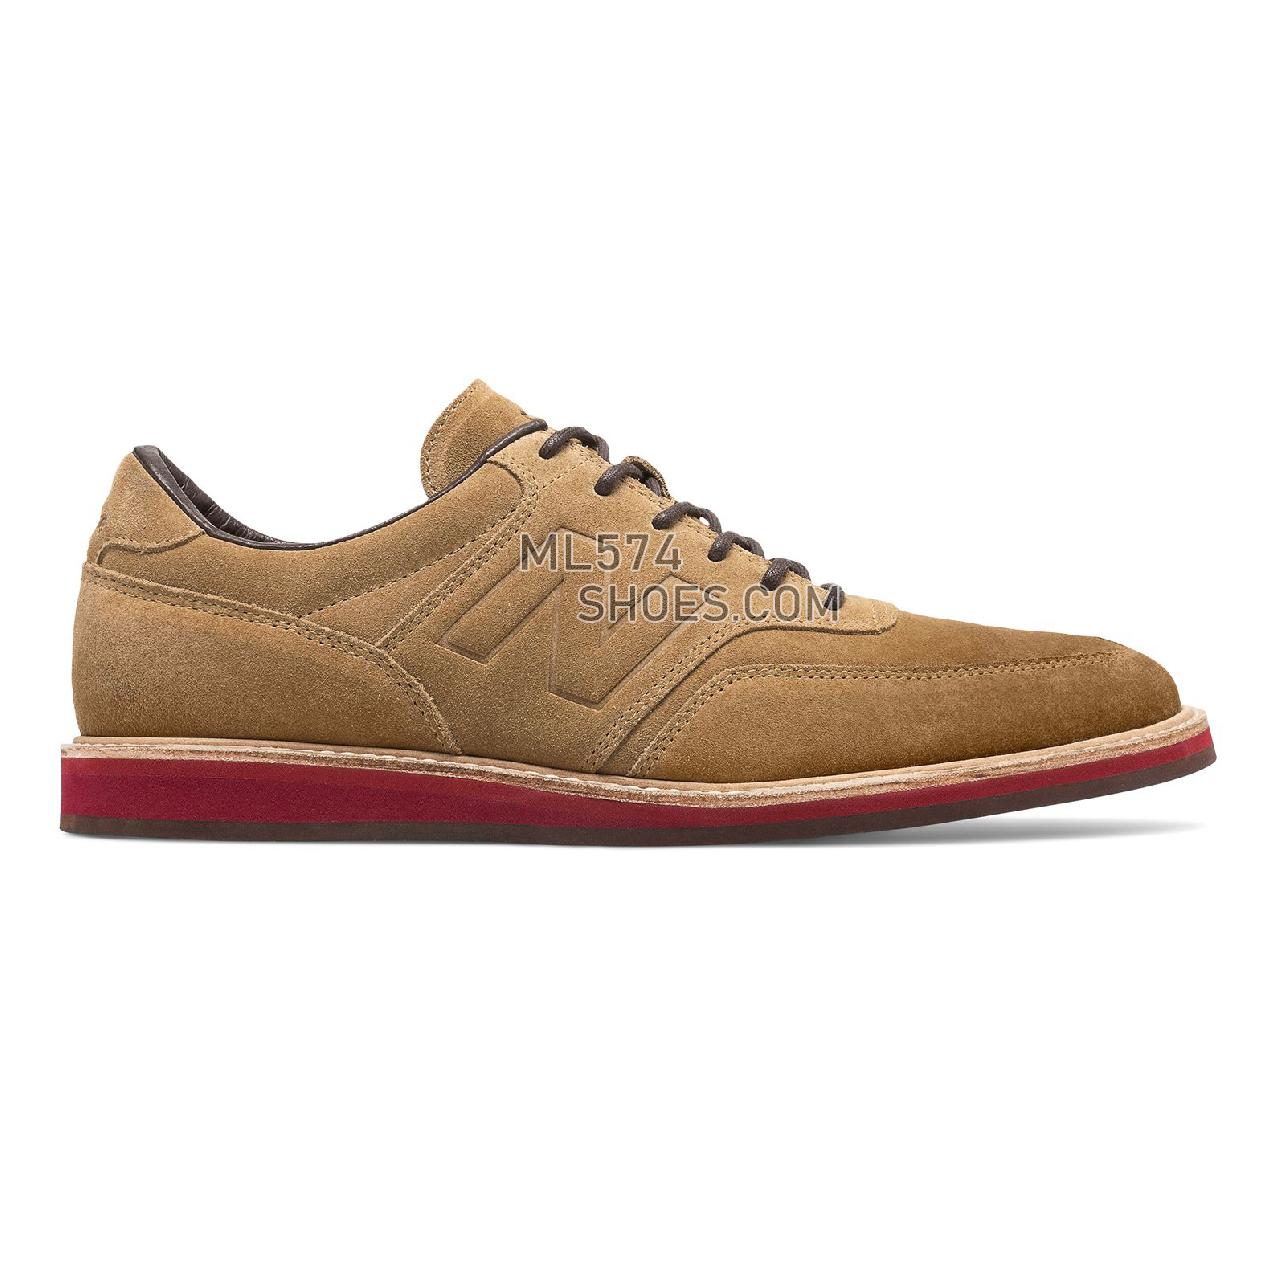 New Balance 1100 - Men's 1100 - Walking Brown with Maroon - MD1100DB